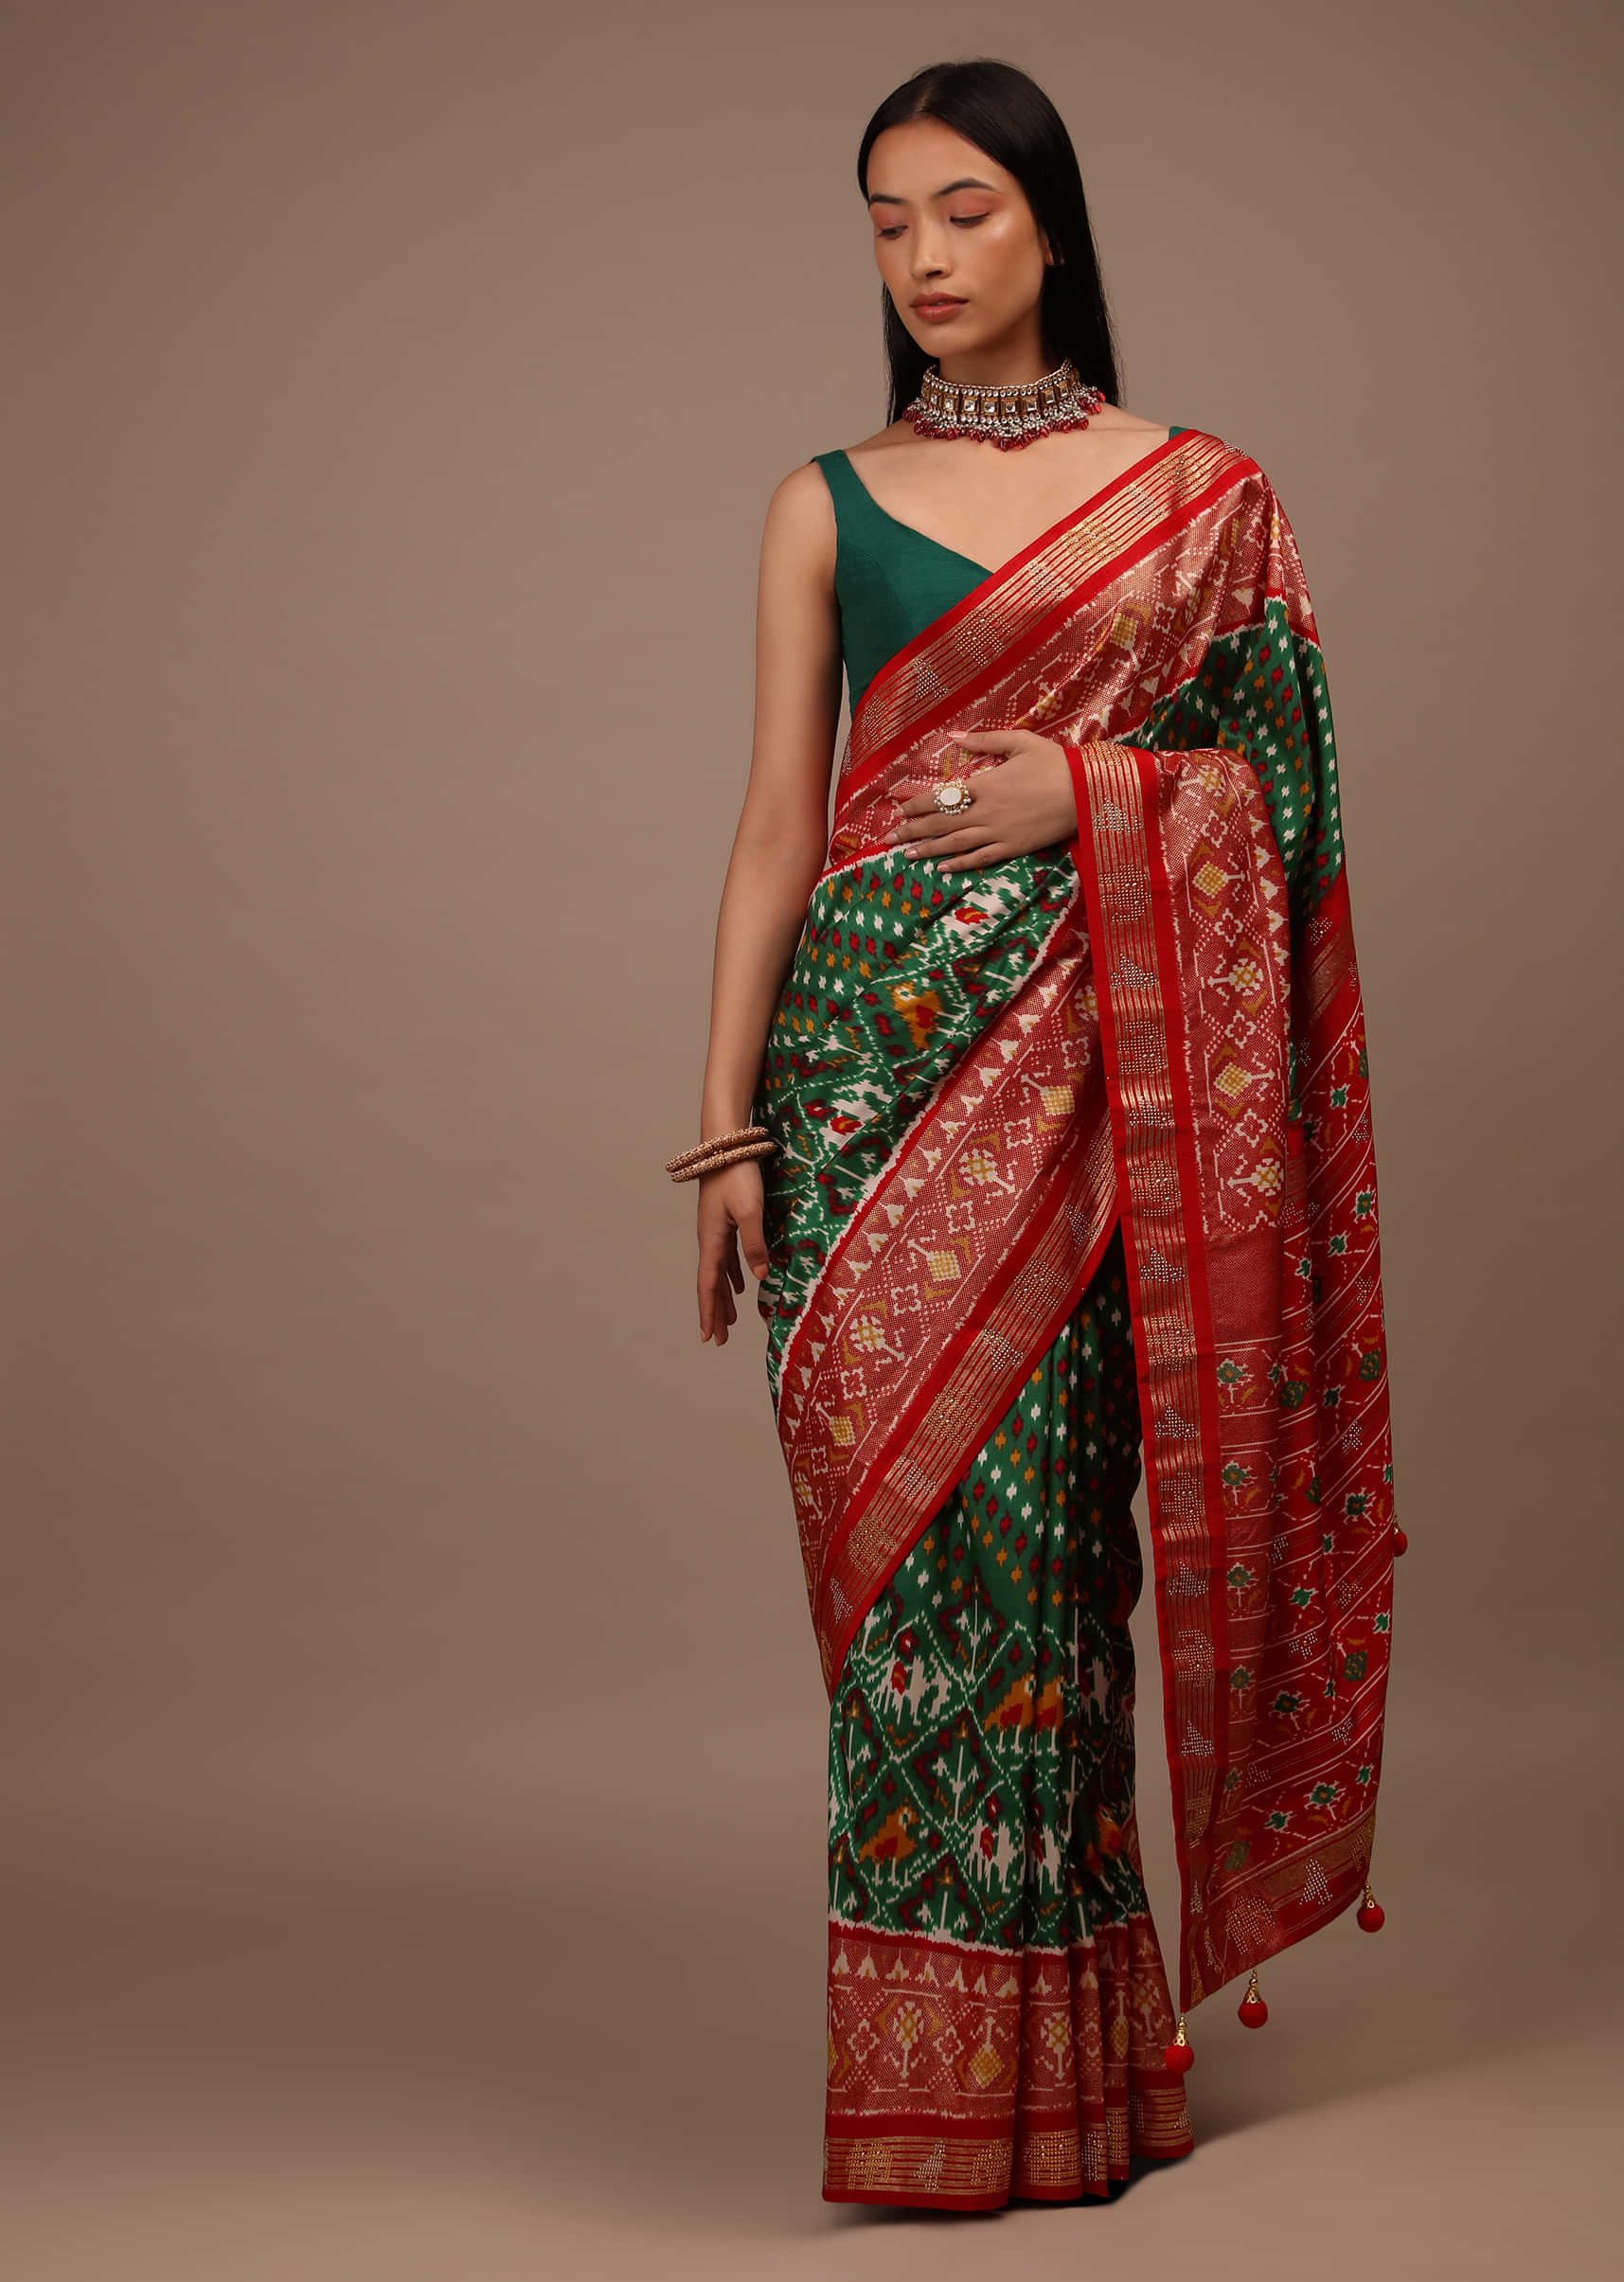 Bottle Green Saree In Silk With Multi Colored Patola And Foil Print And Contrasting Red Border